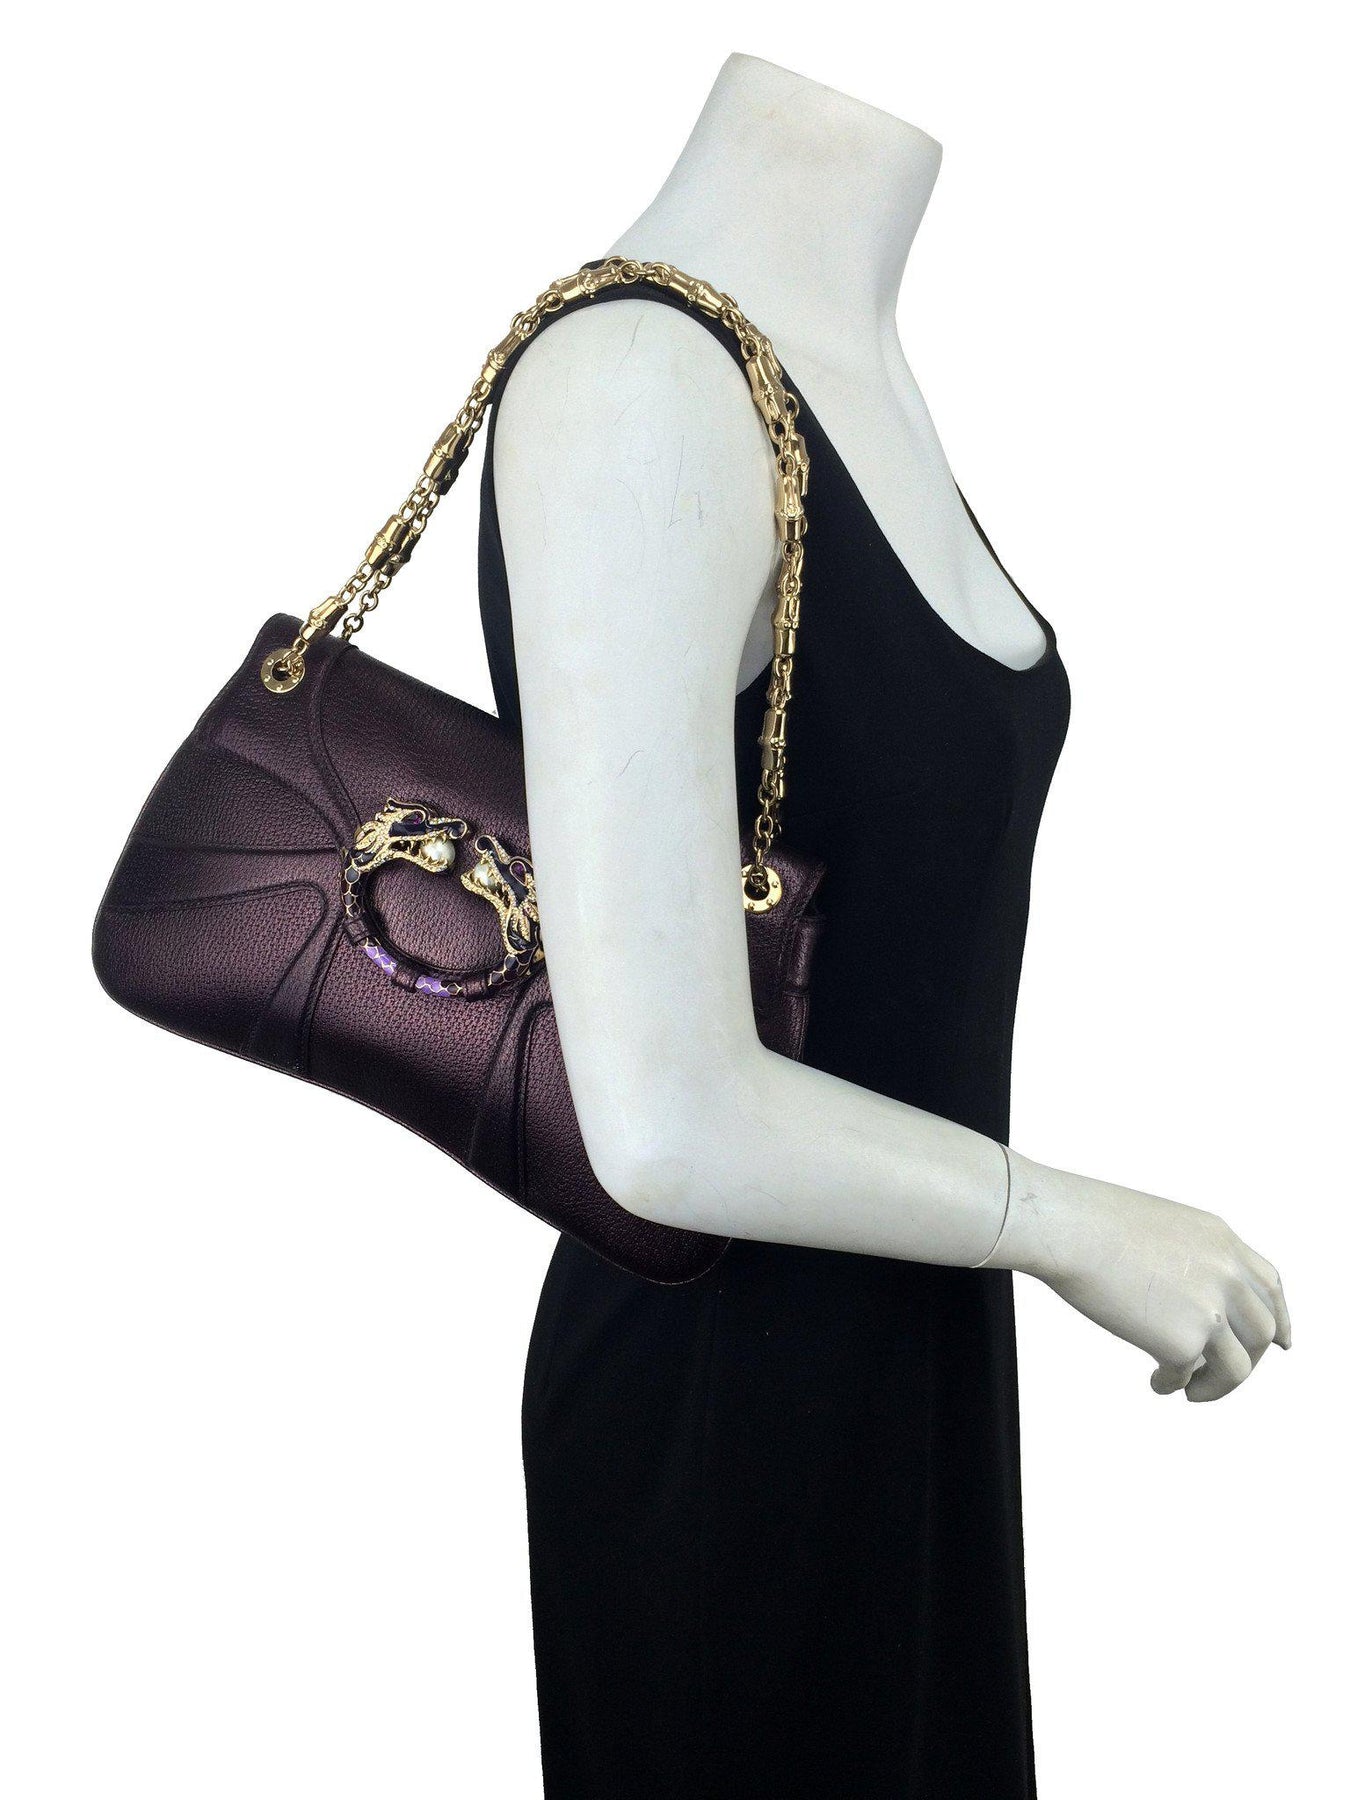 Gucci by Tom Ford Limited Edition Purple Leather Dragon Shoulder Bag